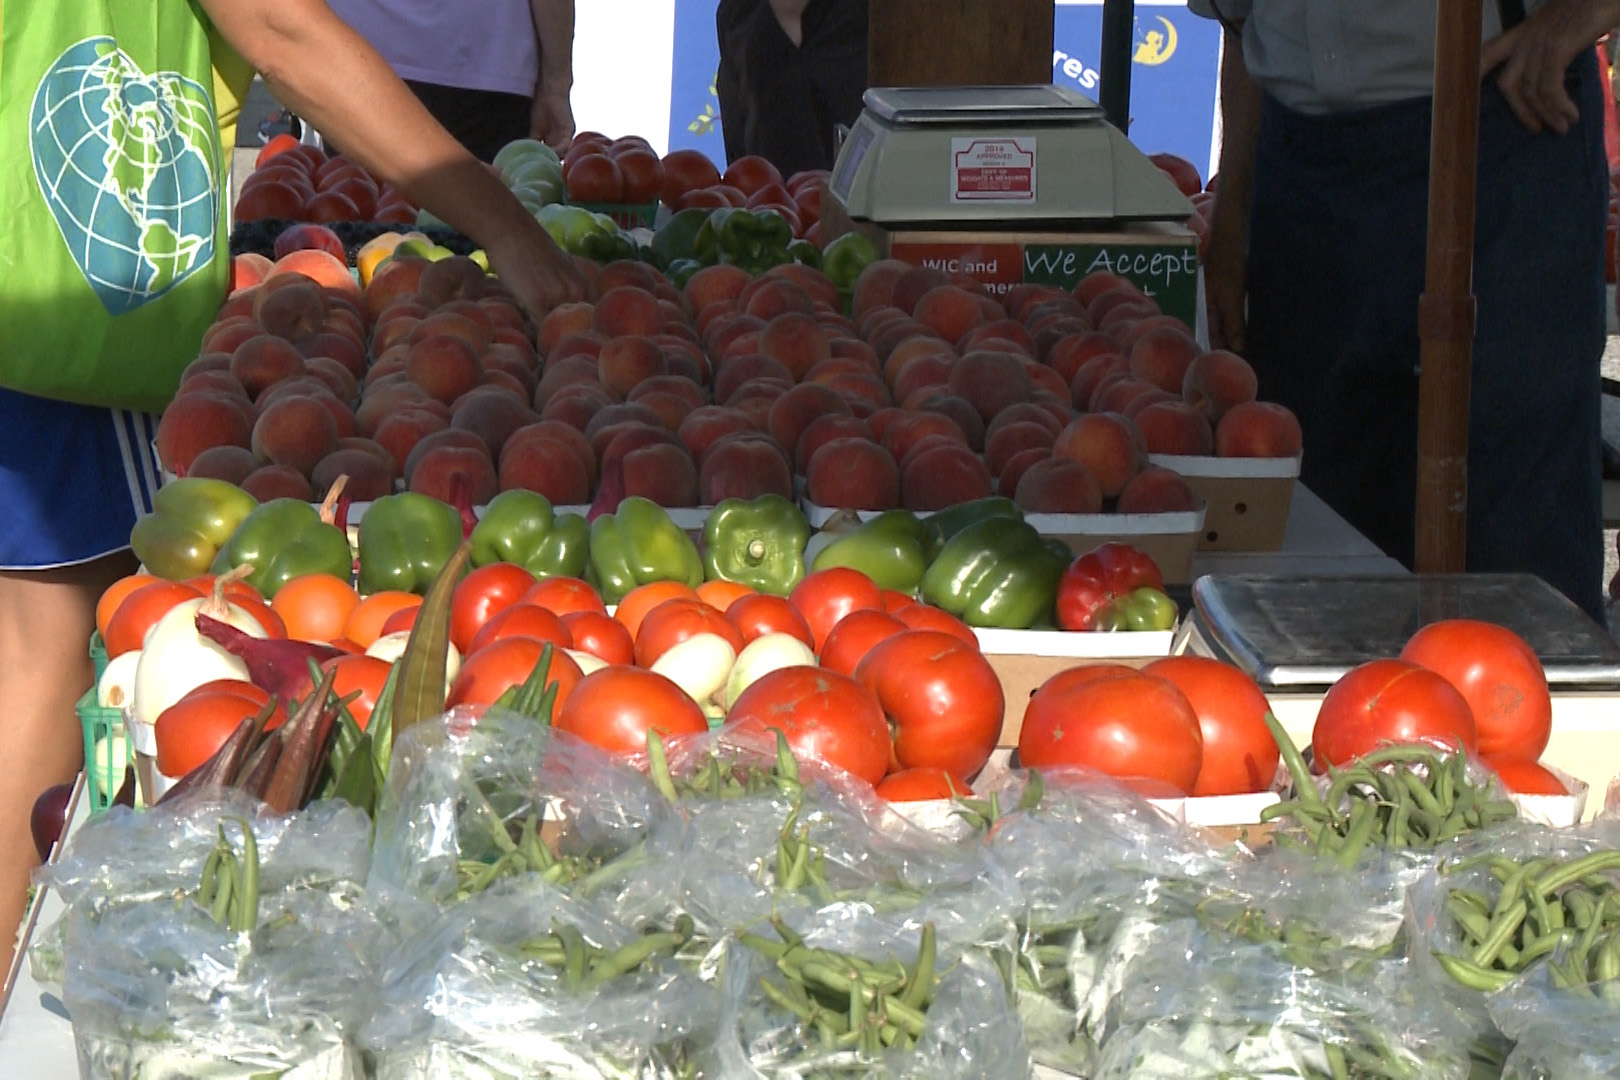 Tomatoes at the alternative farmers' market, August 3, 2019.